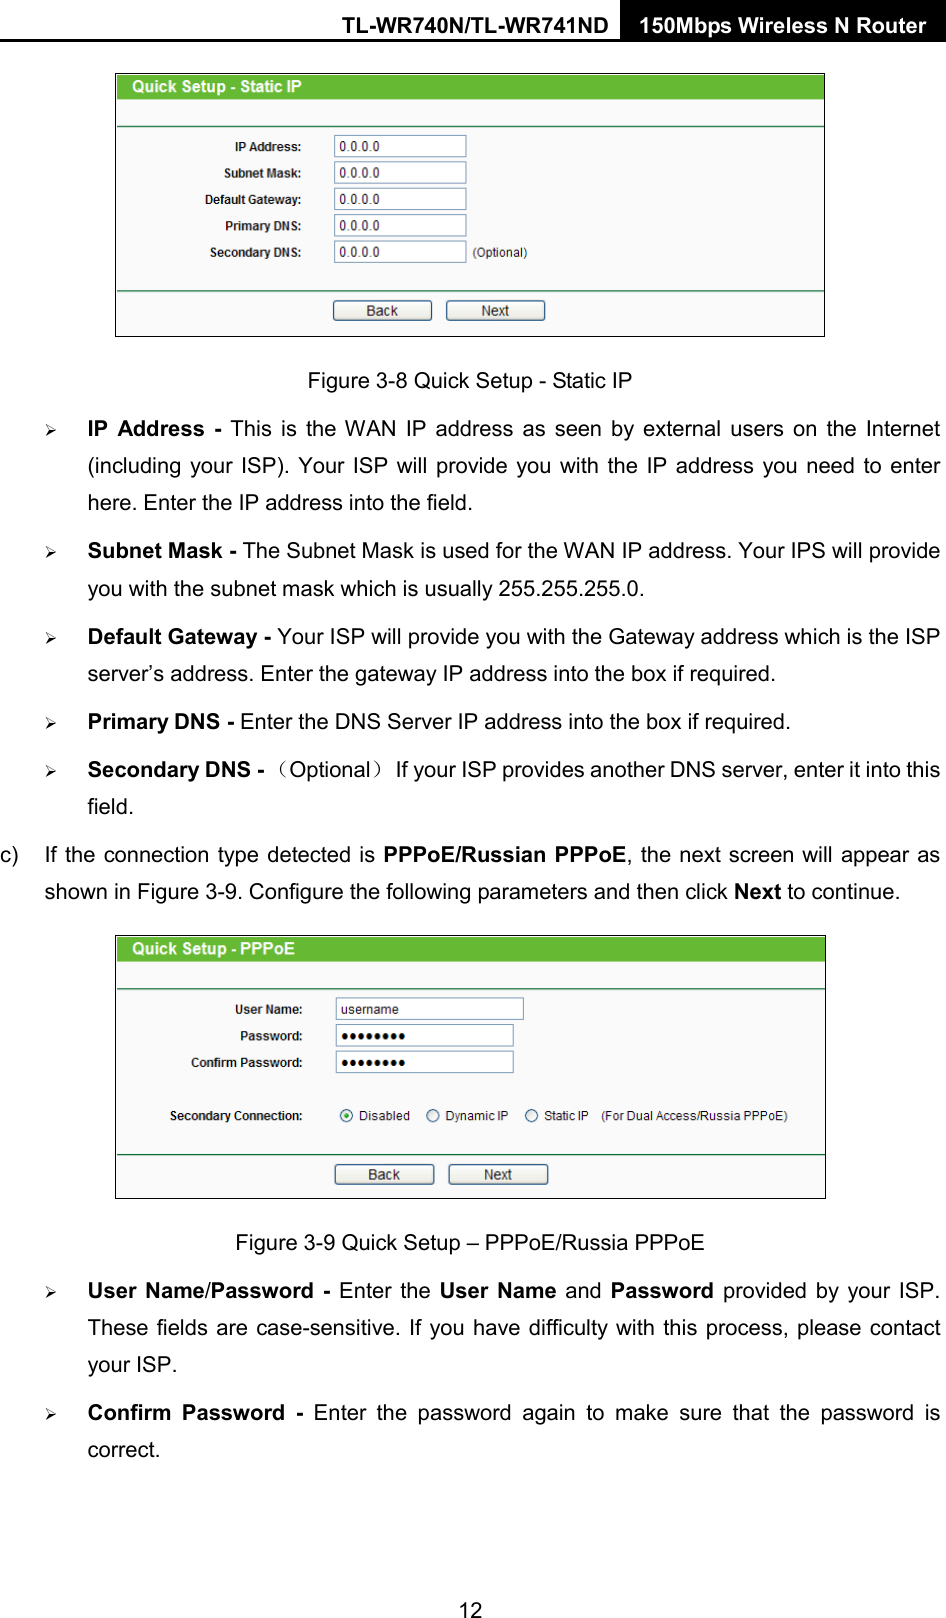 TL-WR740N/TL-WR741ND 150Mbps Wireless N Router   Figure 3-8 Quick Setup - Static IP  IP Address -  This is the WAN IP address as seen by external users on the Internet (including your ISP). Your ISP will provide you with the IP address you need to enter here. Enter the IP address into the field.  Subnet Mask - The Subnet Mask is used for the WAN IP address. Your IPS will provide you with the subnet mask which is usually 255.255.255.0.  Default Gateway - Your ISP will provide you with the Gateway address which is the ISP server’s address. Enter the gateway IP address into the box if required.  Primary DNS - Enter the DNS Server IP address into the box if required.    Secondary DNS - （Optional） If your ISP provides another DNS server, enter it into this field. c)  If the connection type detected is PPPoE/Russian PPPoE, the next screen will appear as shown in Figure 3-9. Configure the following parameters and then click Next to continue.  Figure 3-9 Quick Setup – PPPoE/Russia PPPoE  User Name/Password  -  Enter the User Name and Password provided by your ISP. These fields are case-sensitive. If you have difficulty with this process, please contact your ISP.  Confirm Password - Enter the password again to make sure that the password is correct.   12 